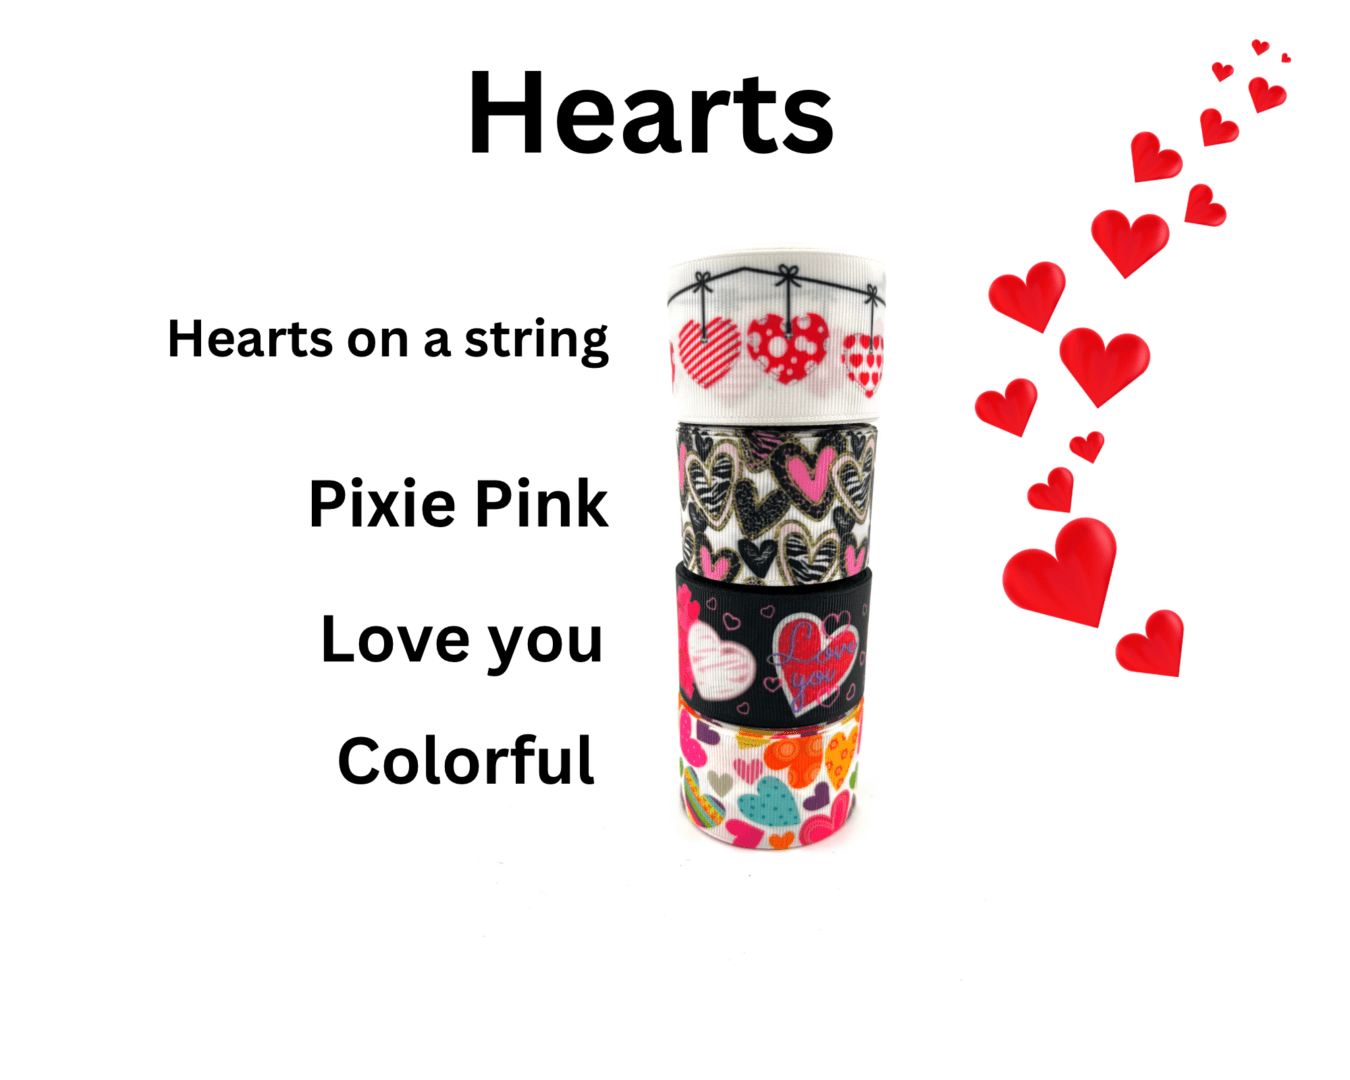 Hearts on a string pixie pink love you colorful.